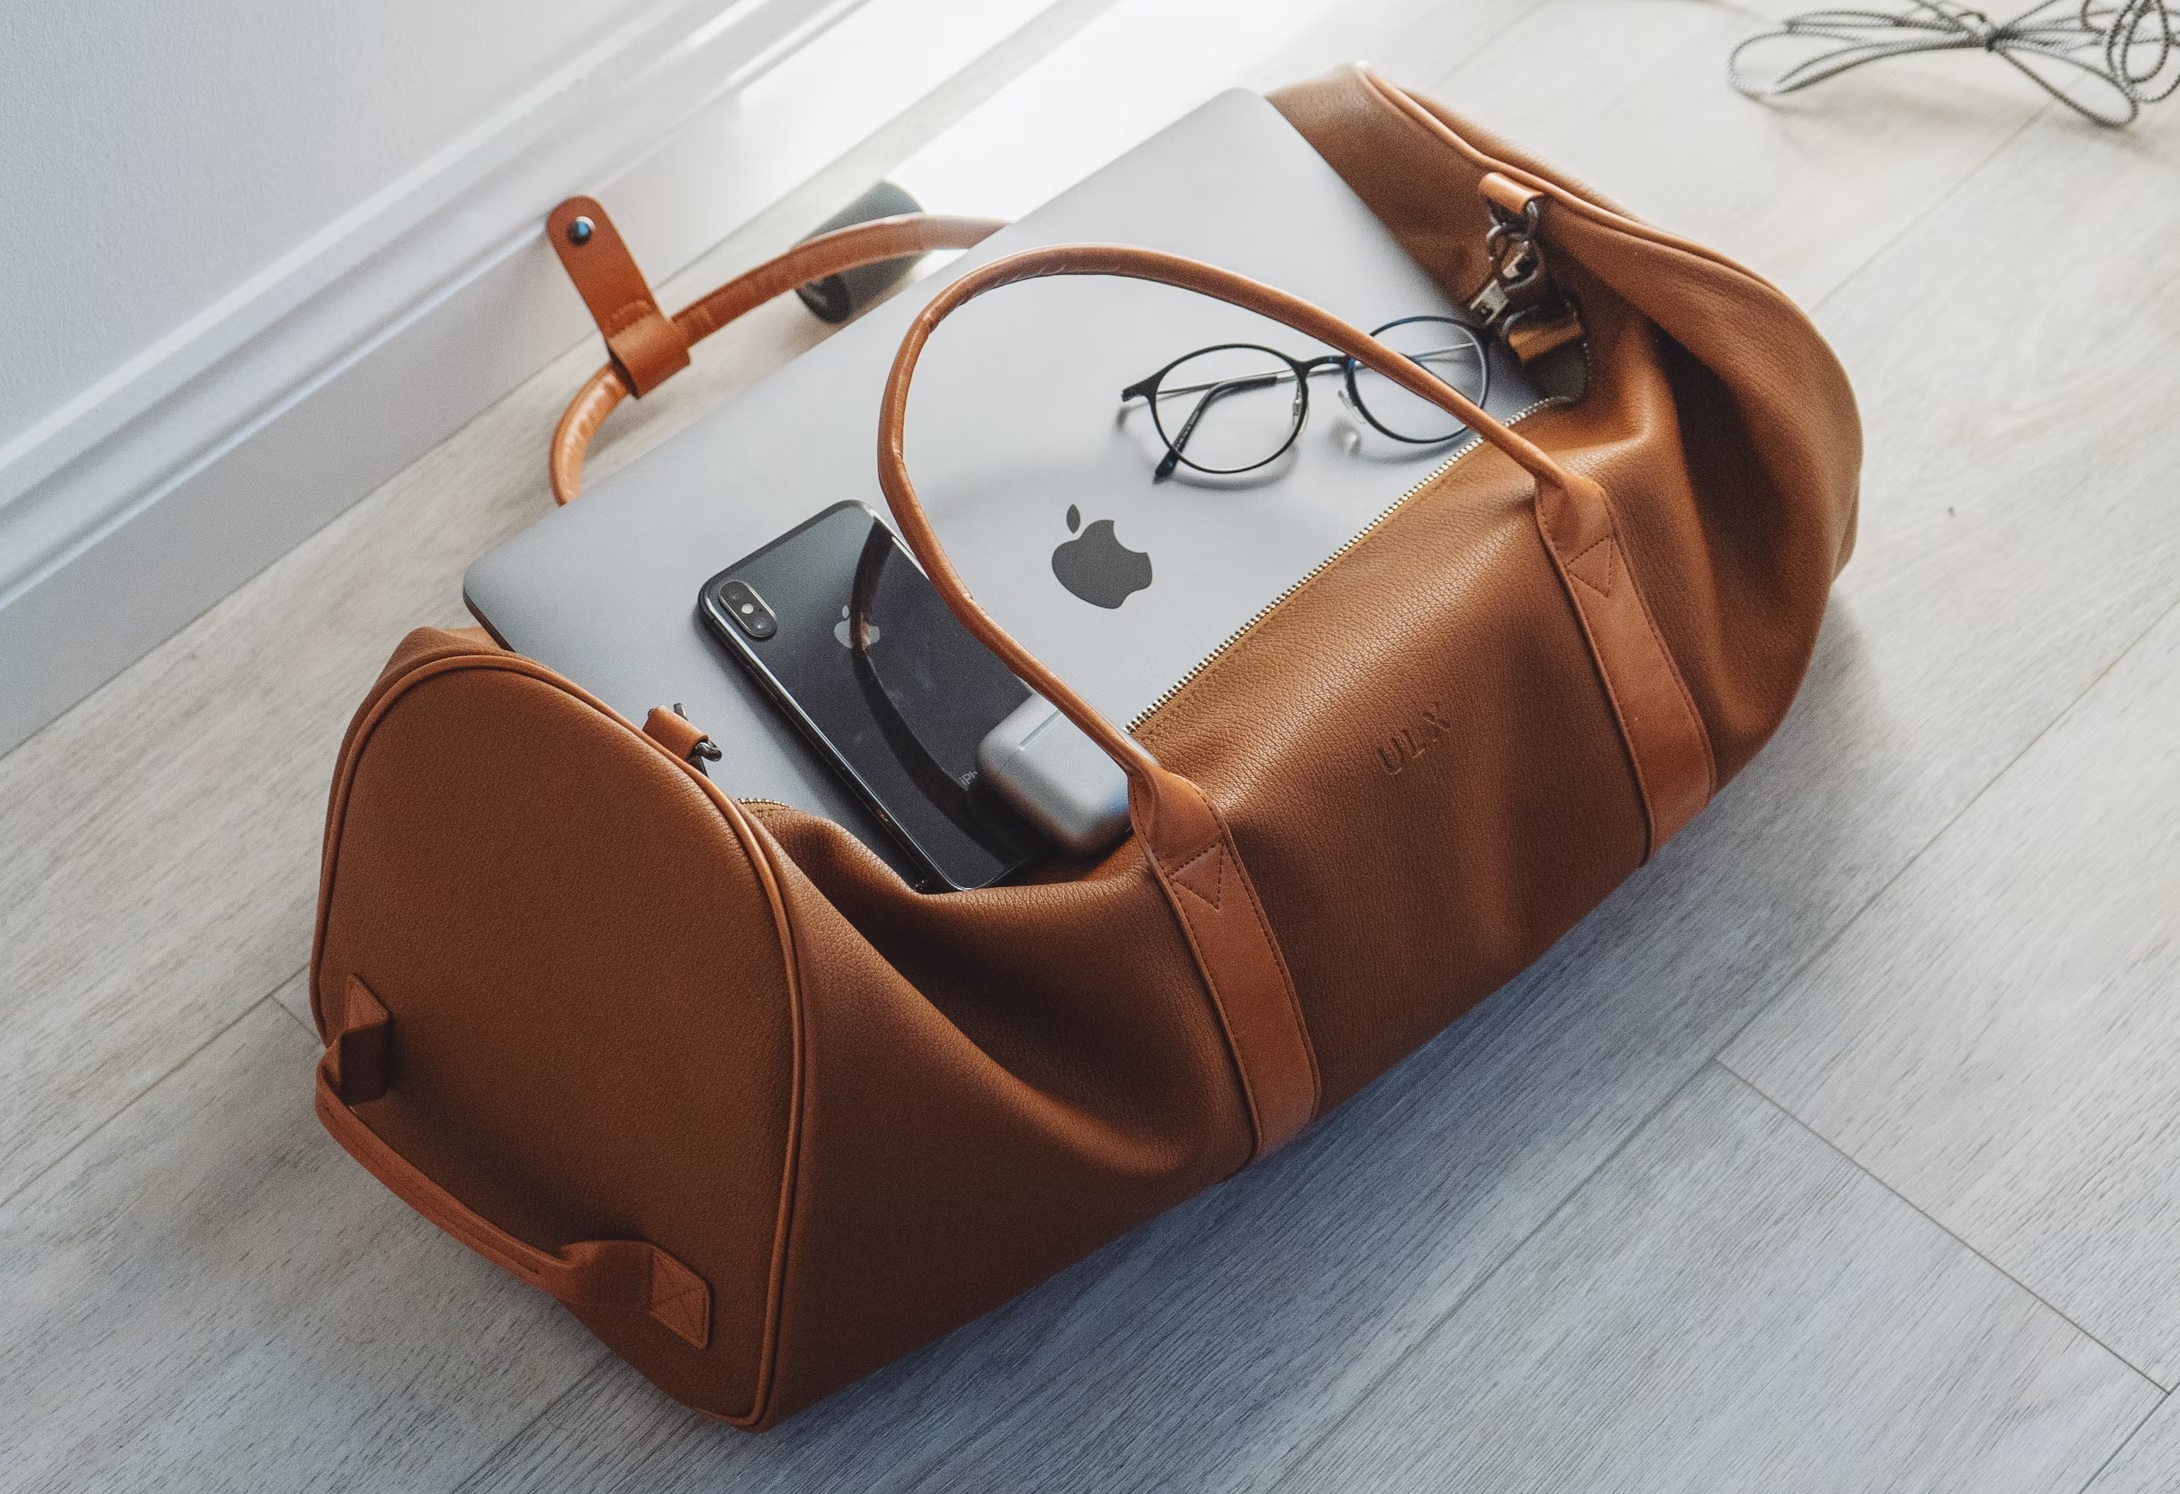 Duffel bag with iPhone, MacBook, and Airpods